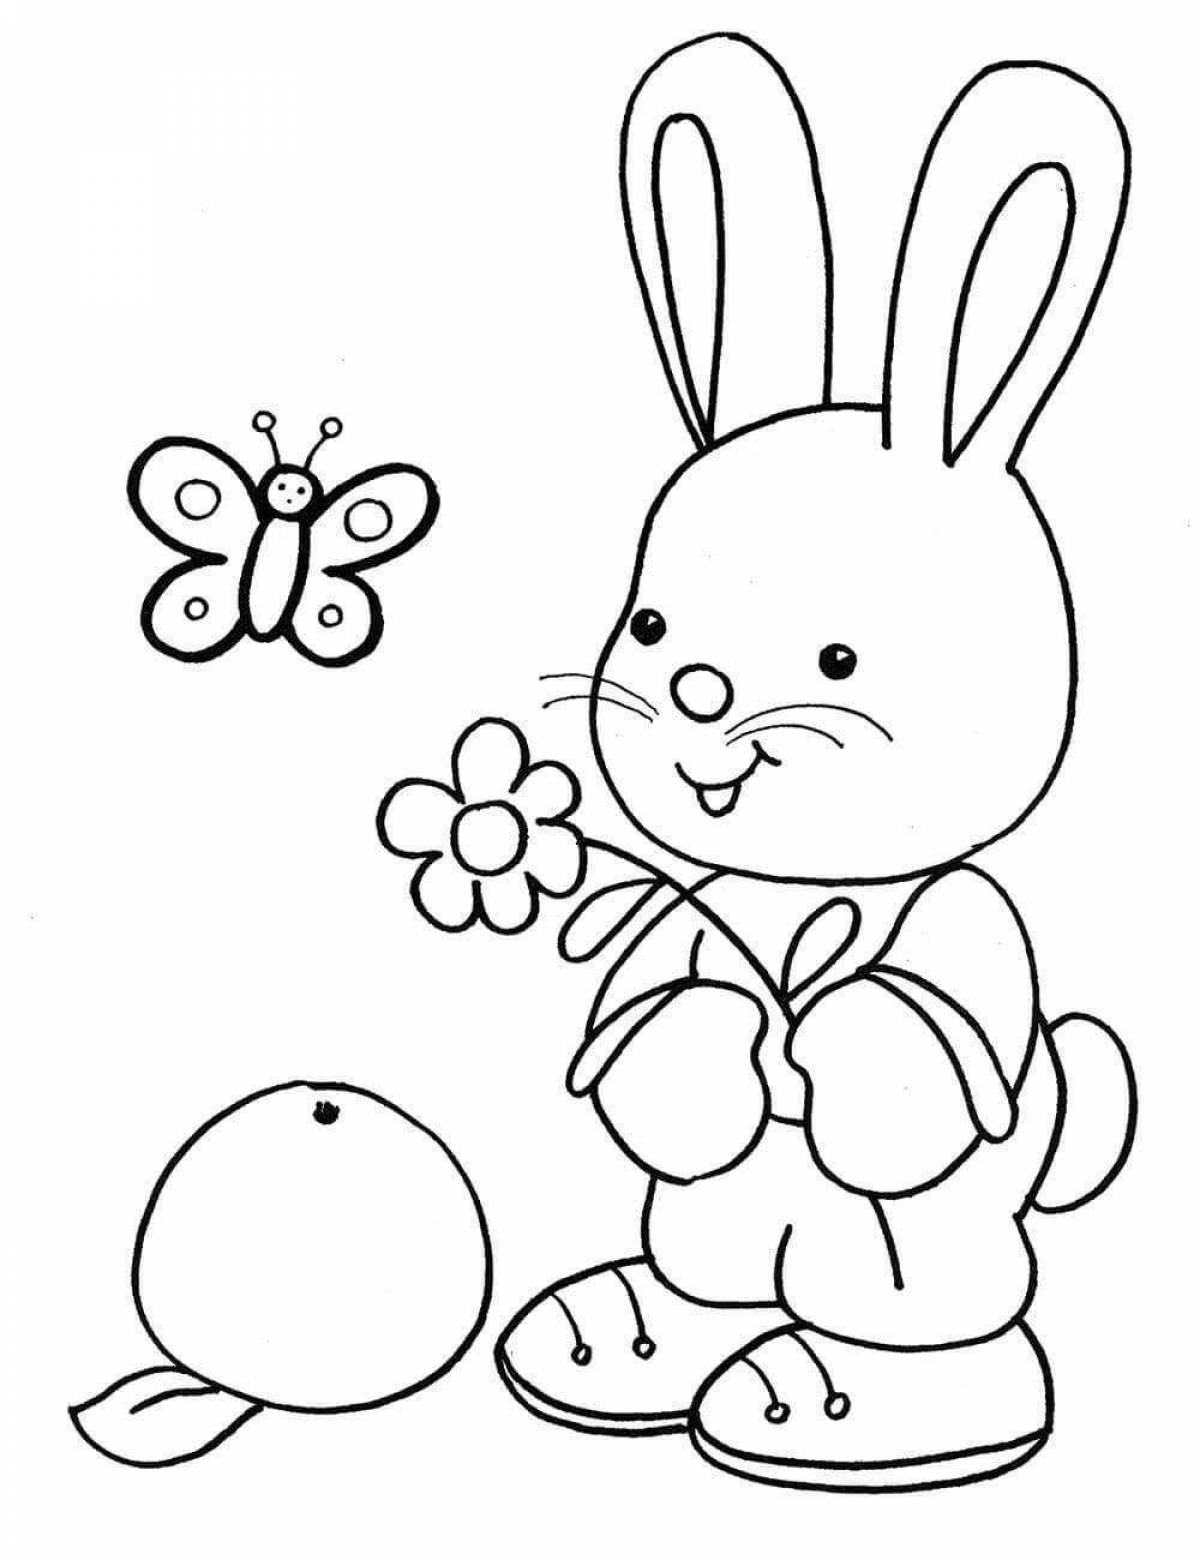 Coloring pages for girls 2-3 years old